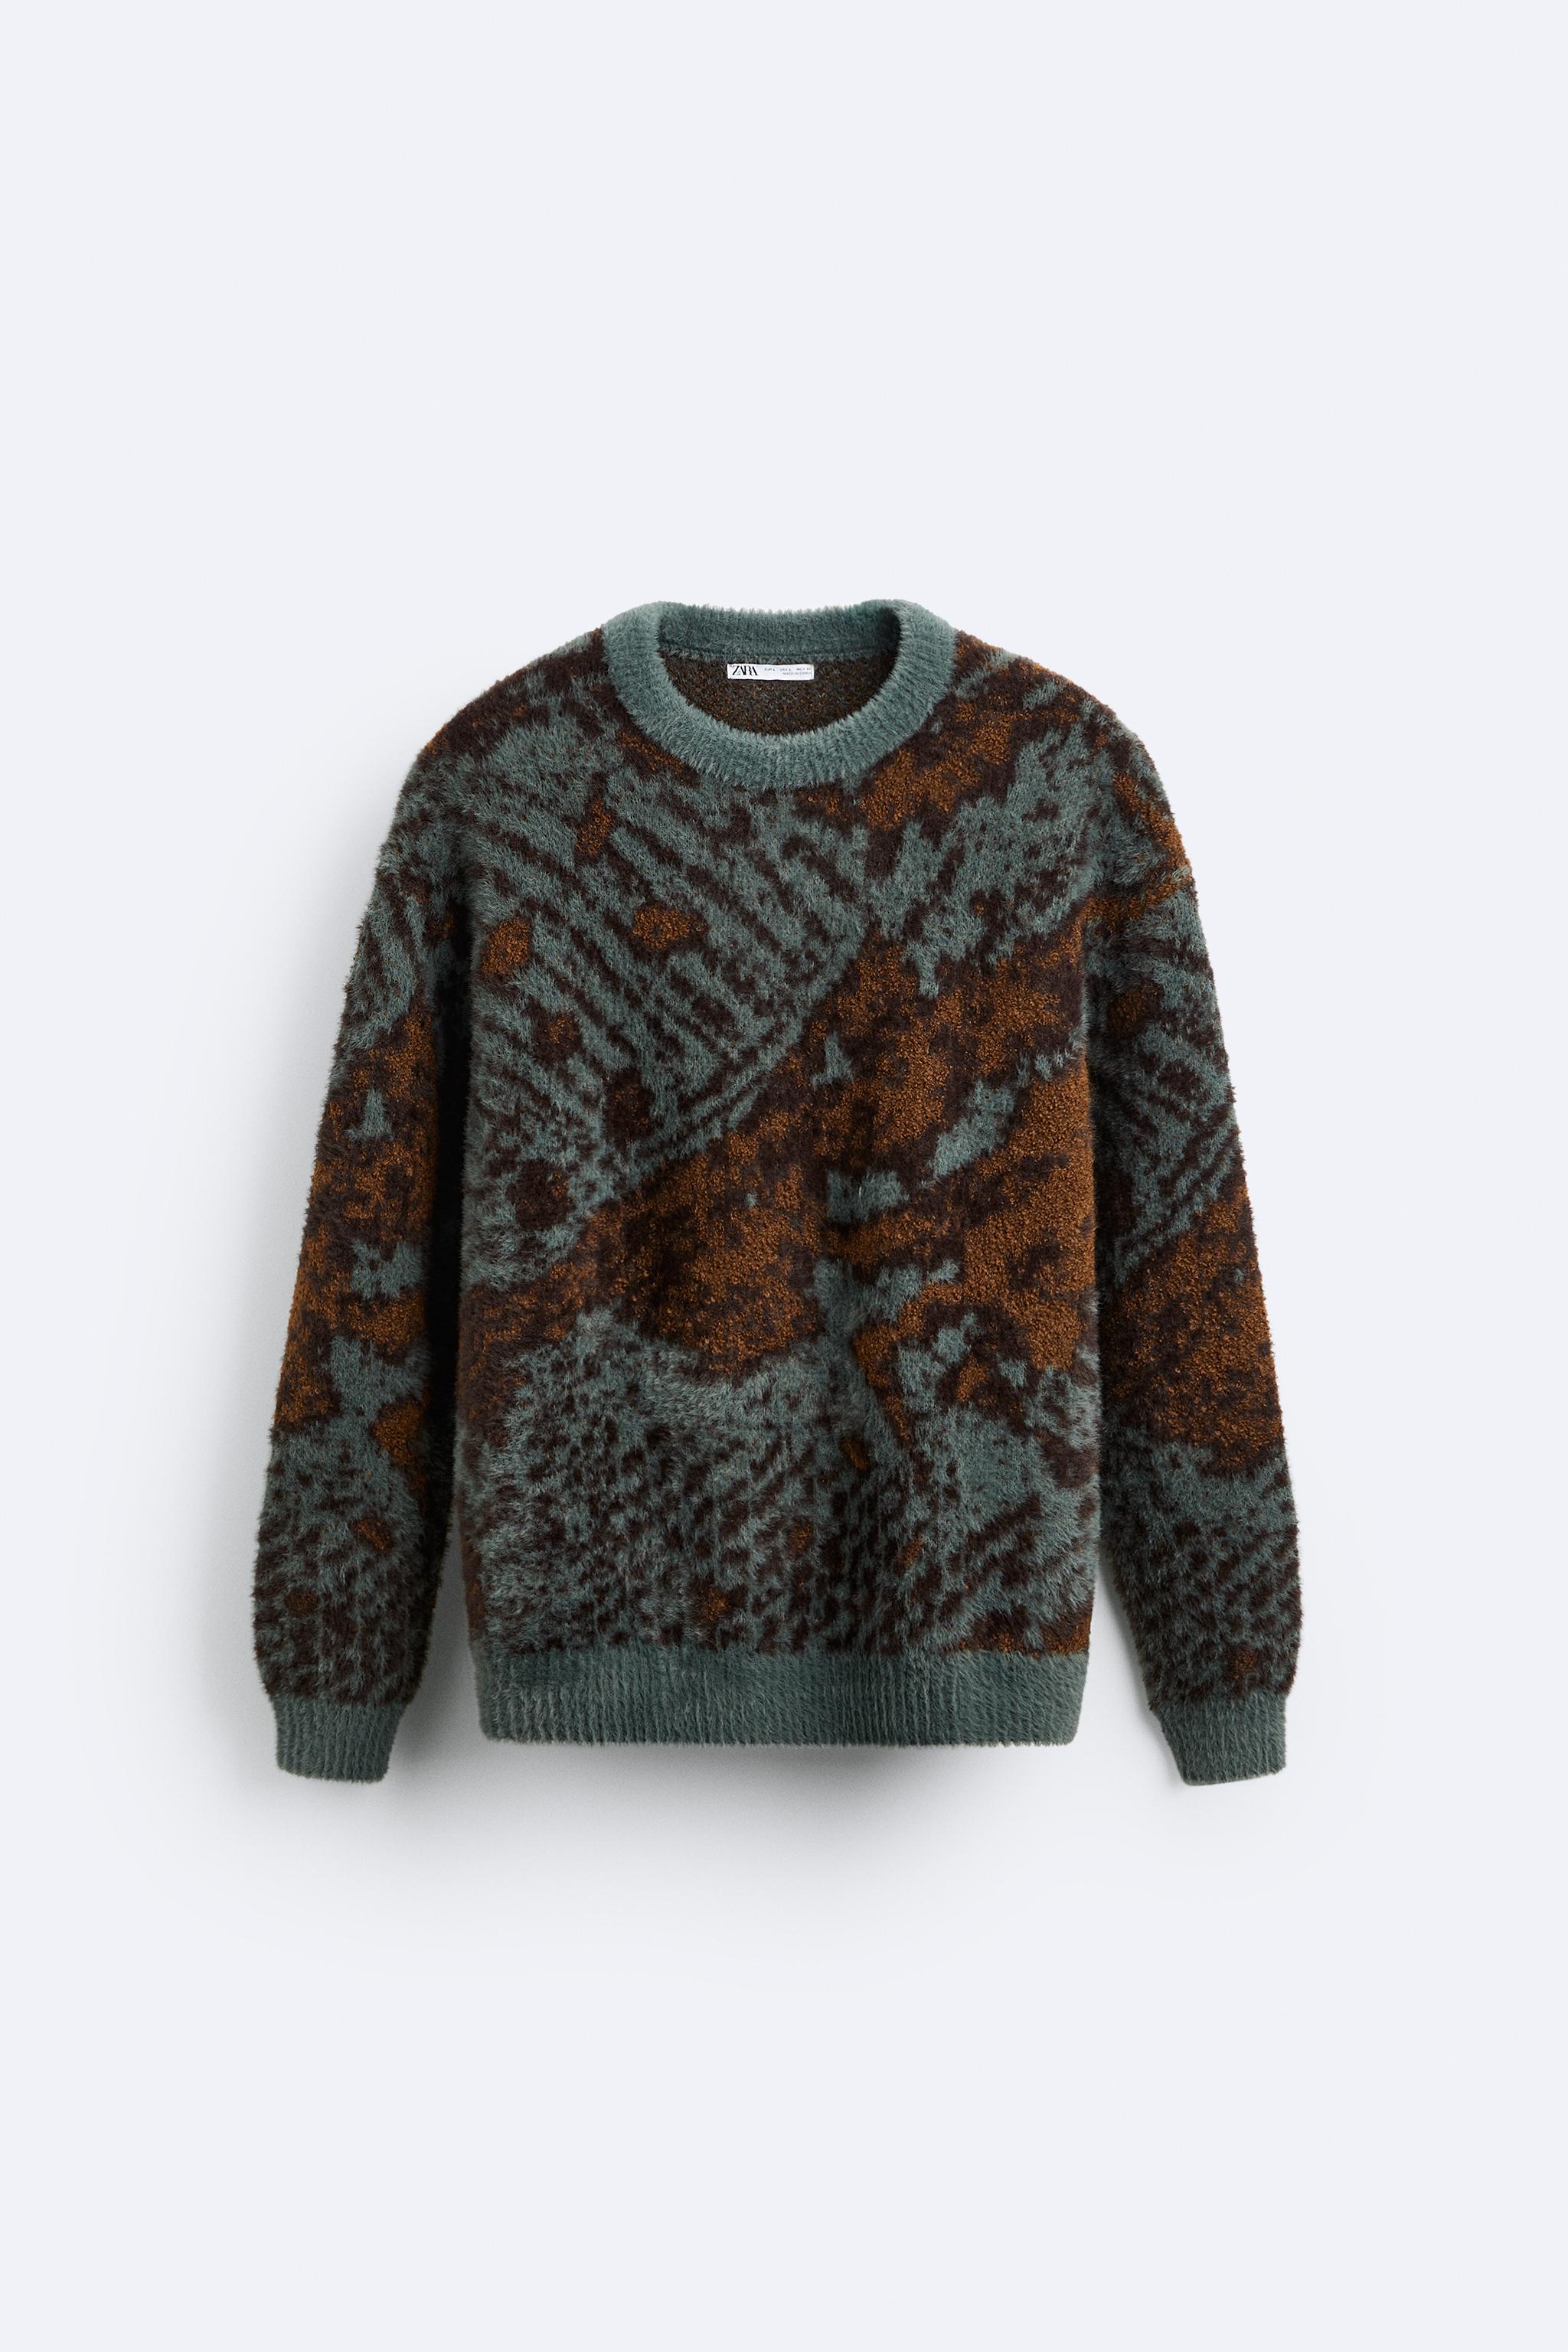 ABSTRACT JACQUARD SWEATER - Anthracite Gray | ZARA Canada